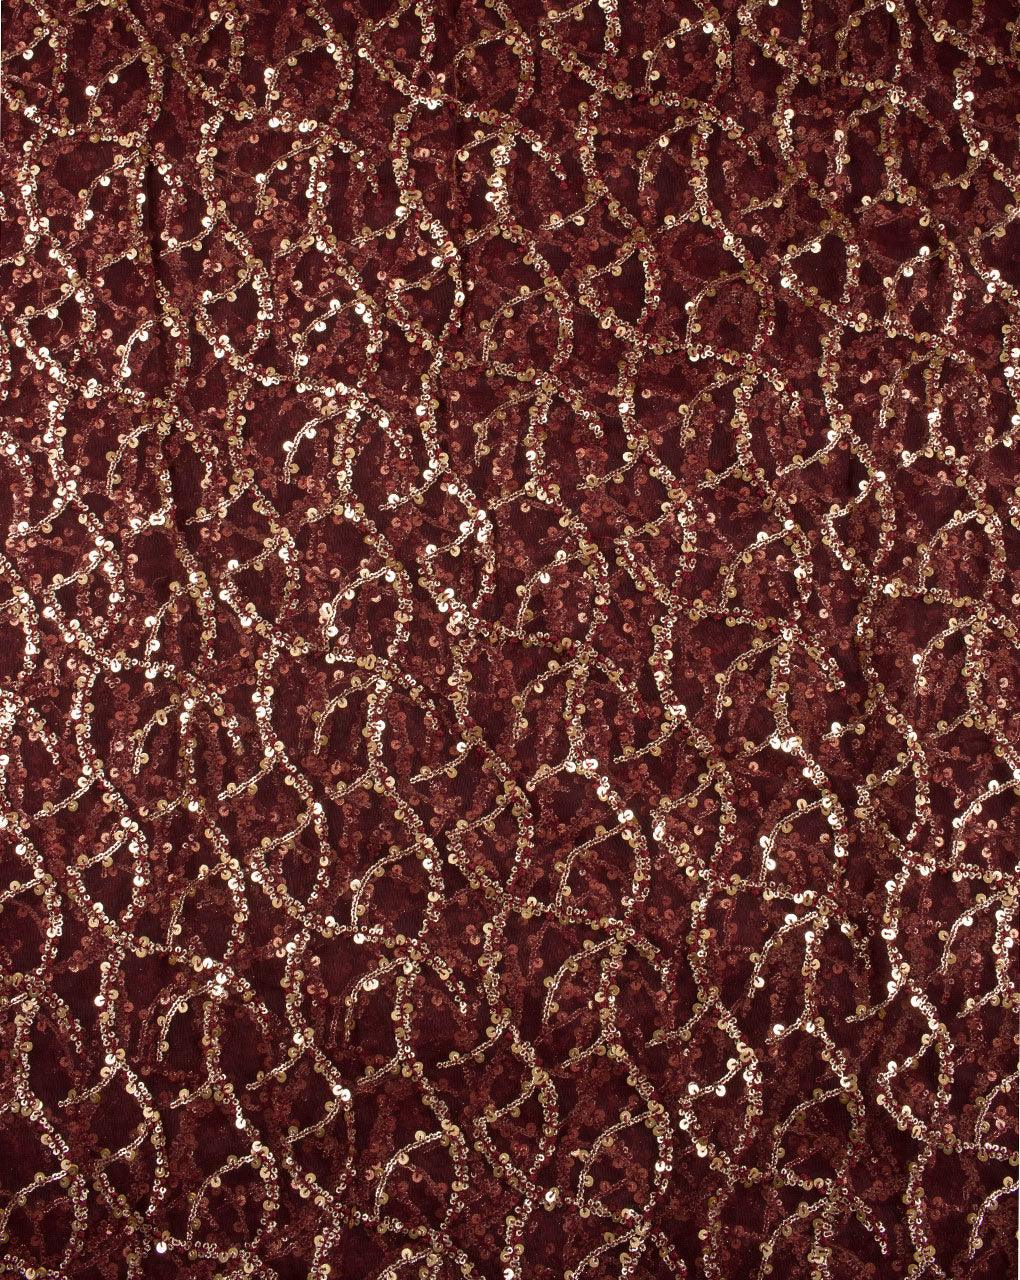 Embroidered Net Fabric Online - Buy Embroidered Net Fabric